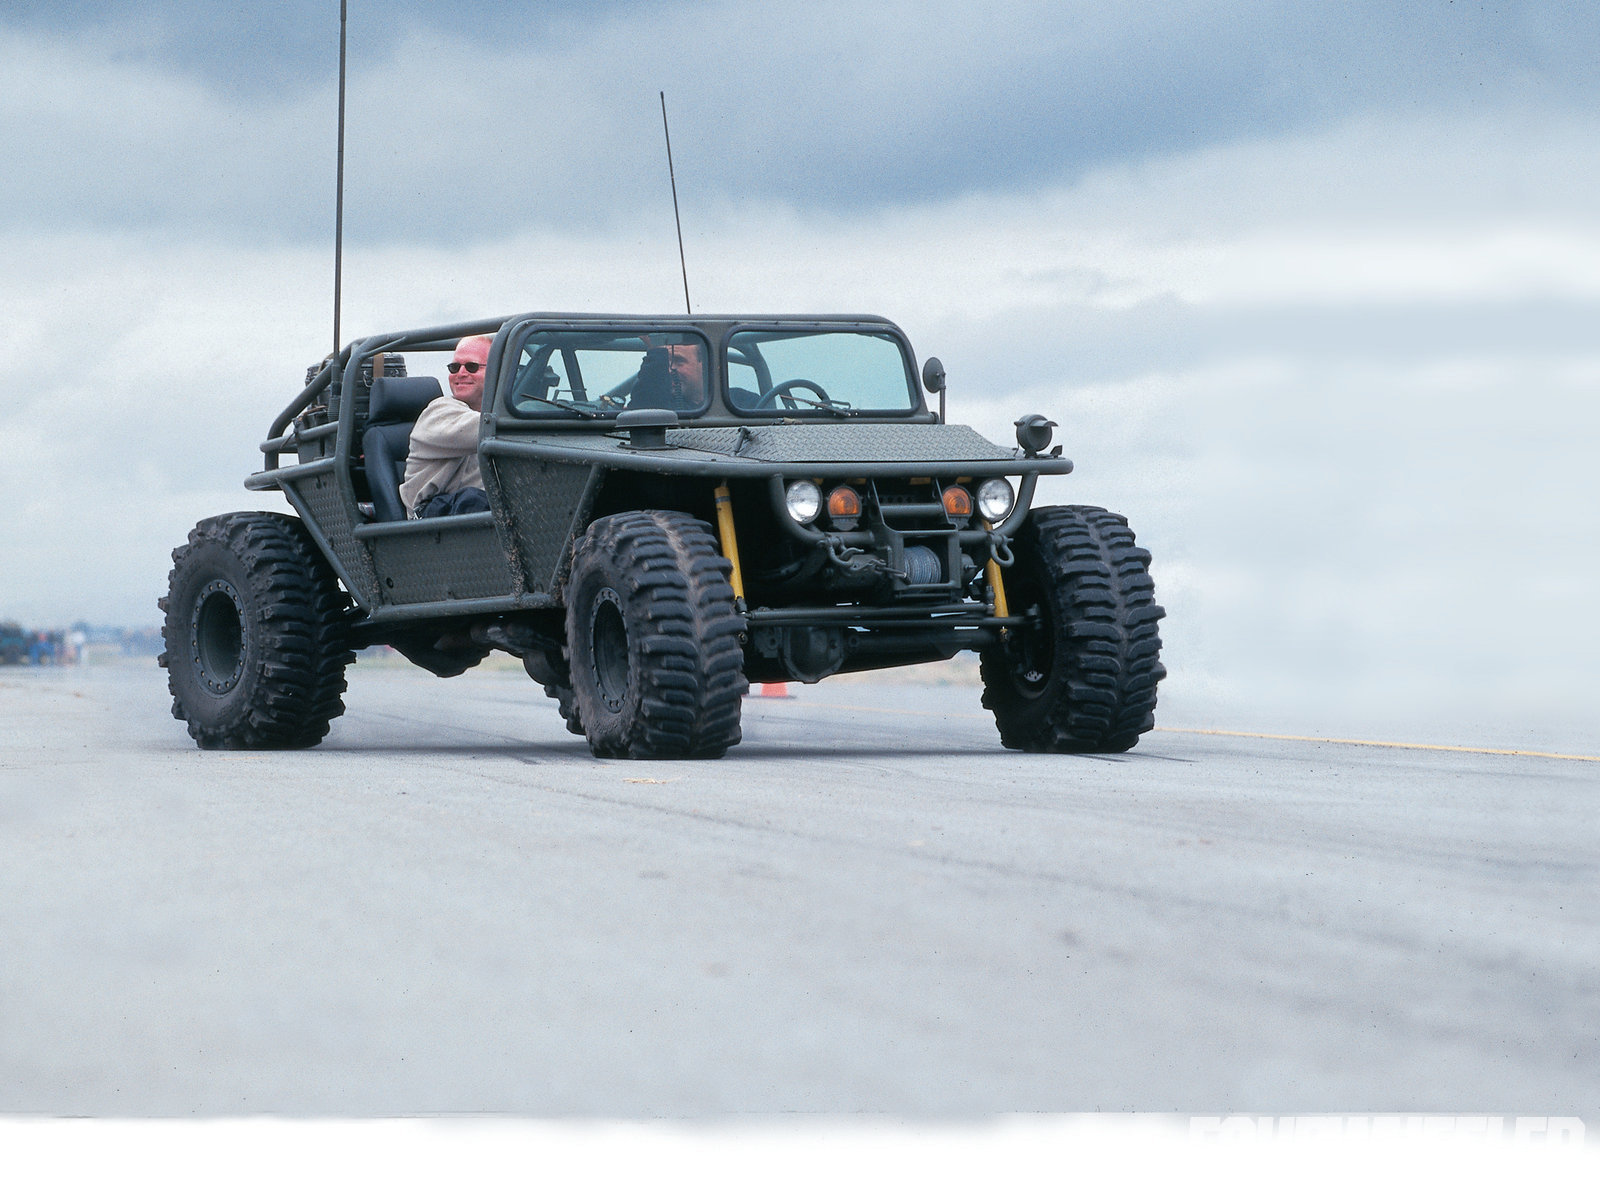 14 Best Off-Road Vehicles Ever - Page 8 of 14 - Carophile